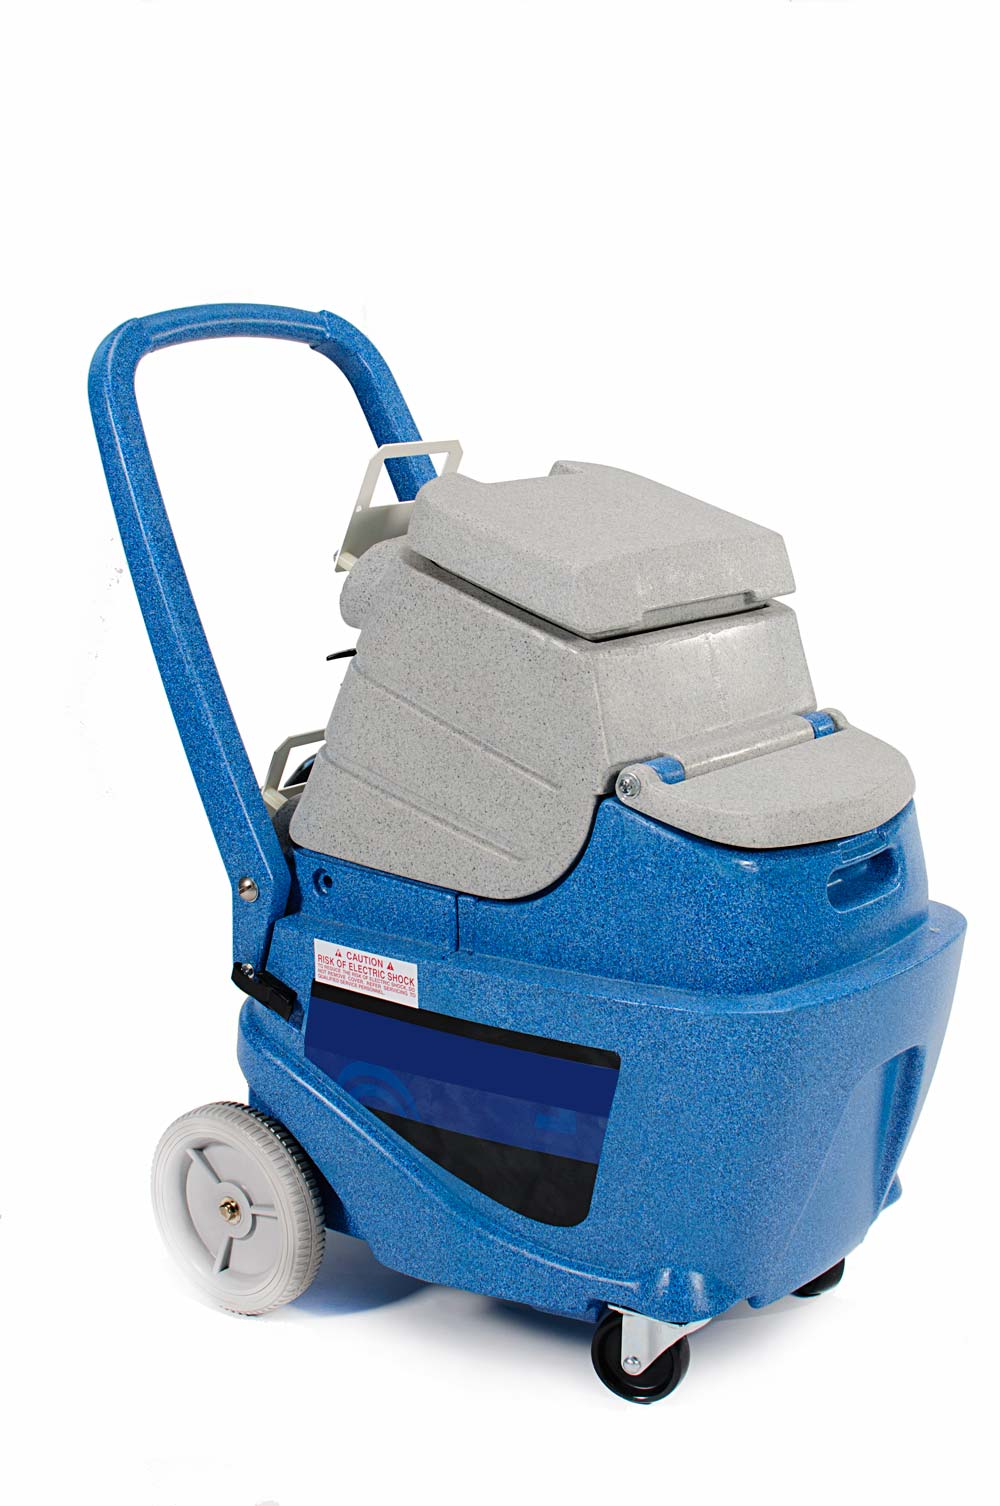 Auto Detailing Carpet Extractor with Heater - 10 Gallon, 100 PSI